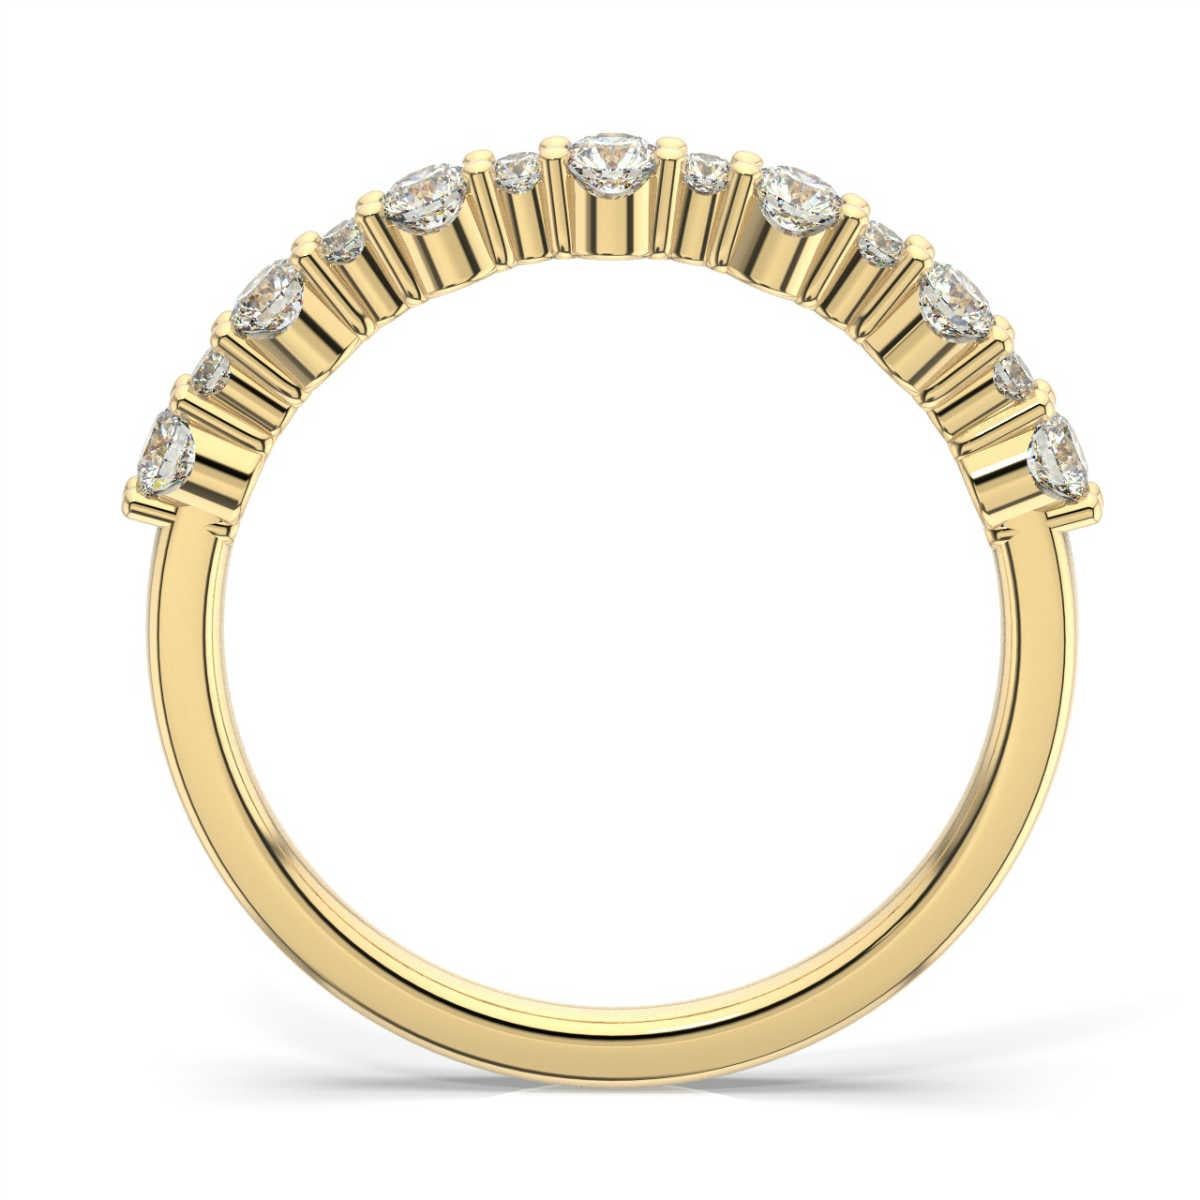 This Petite band features 13 alternating round brilliant diamonds. Experience the difference!

Product details: 

Center Gemstone Color: WHITE
Side Gemstone Type: NATURAL DIAMOND
Side Gemstone Shape: ROUND
Metal: 18K Yellow Gold
Metal Weight: